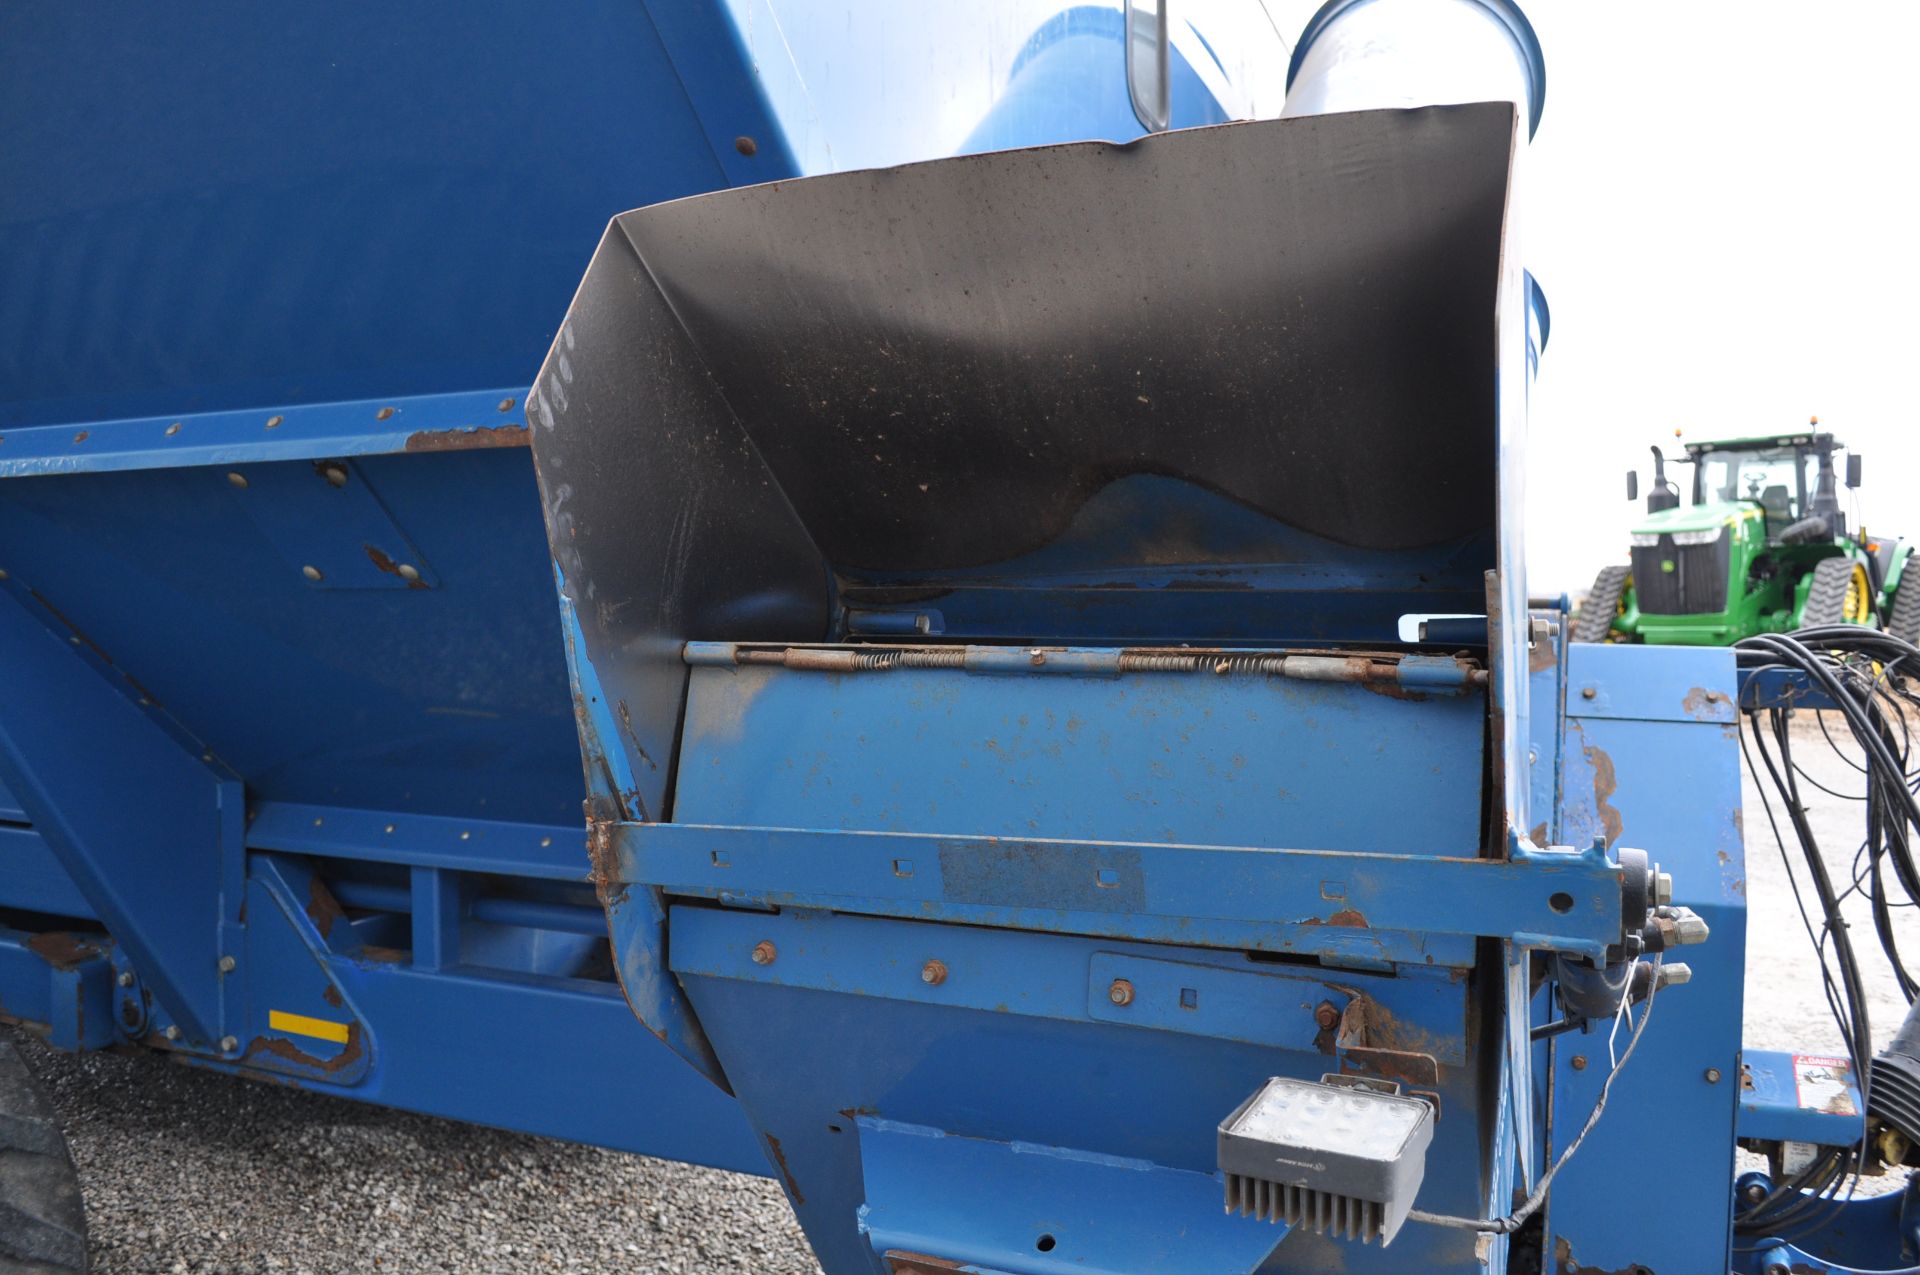 Kinze 1050 grain cart, 30” tracks, 1000 PTO, hyd fold auger, scales, roll tarp - Image 16 of 22